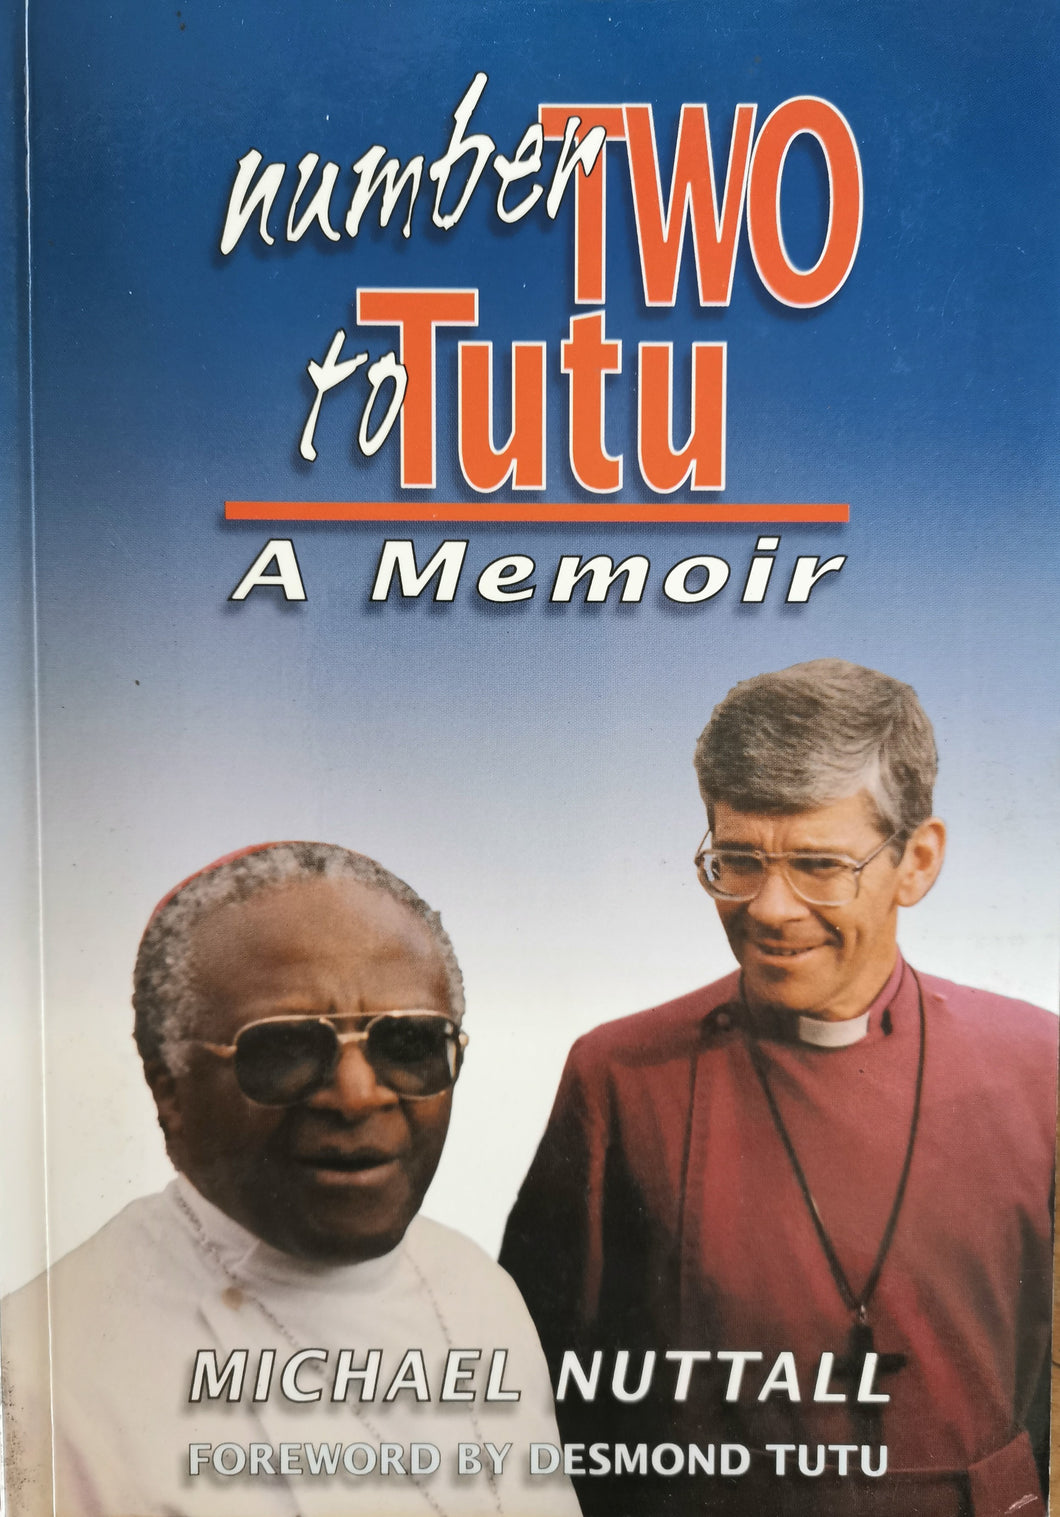 Number Two to Tutu - A Memoir by Michael Nuttall